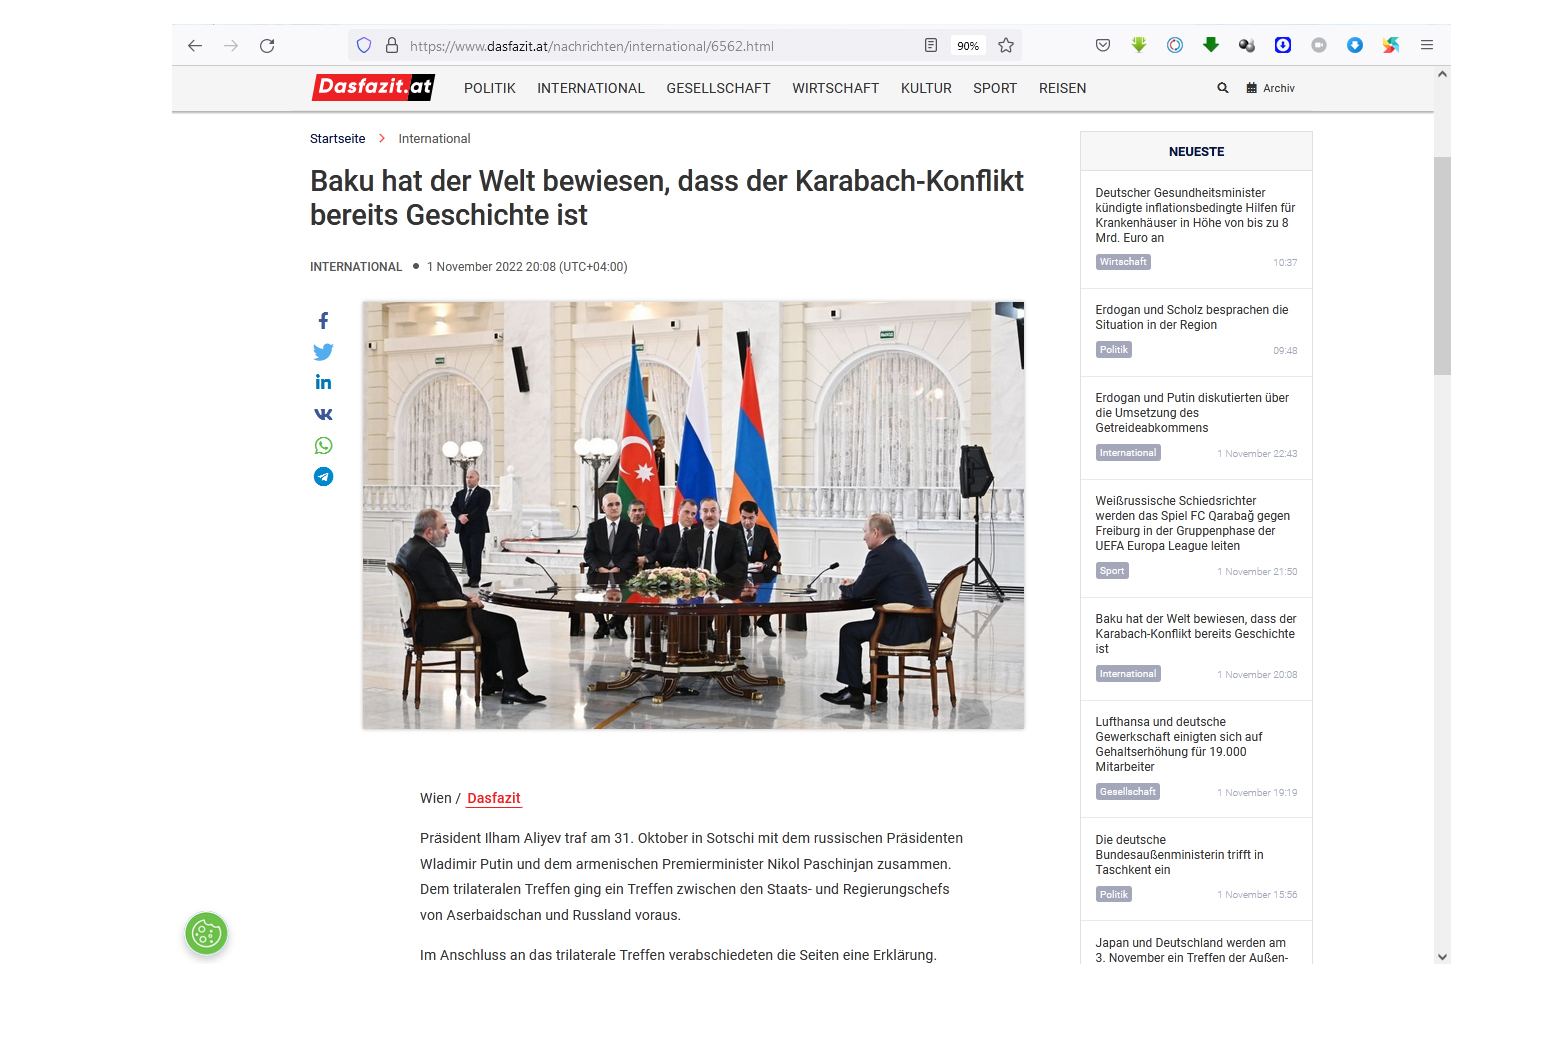 Austrian media publishes article titled "Baku has proved to world, that Karabakh conflict is already history"